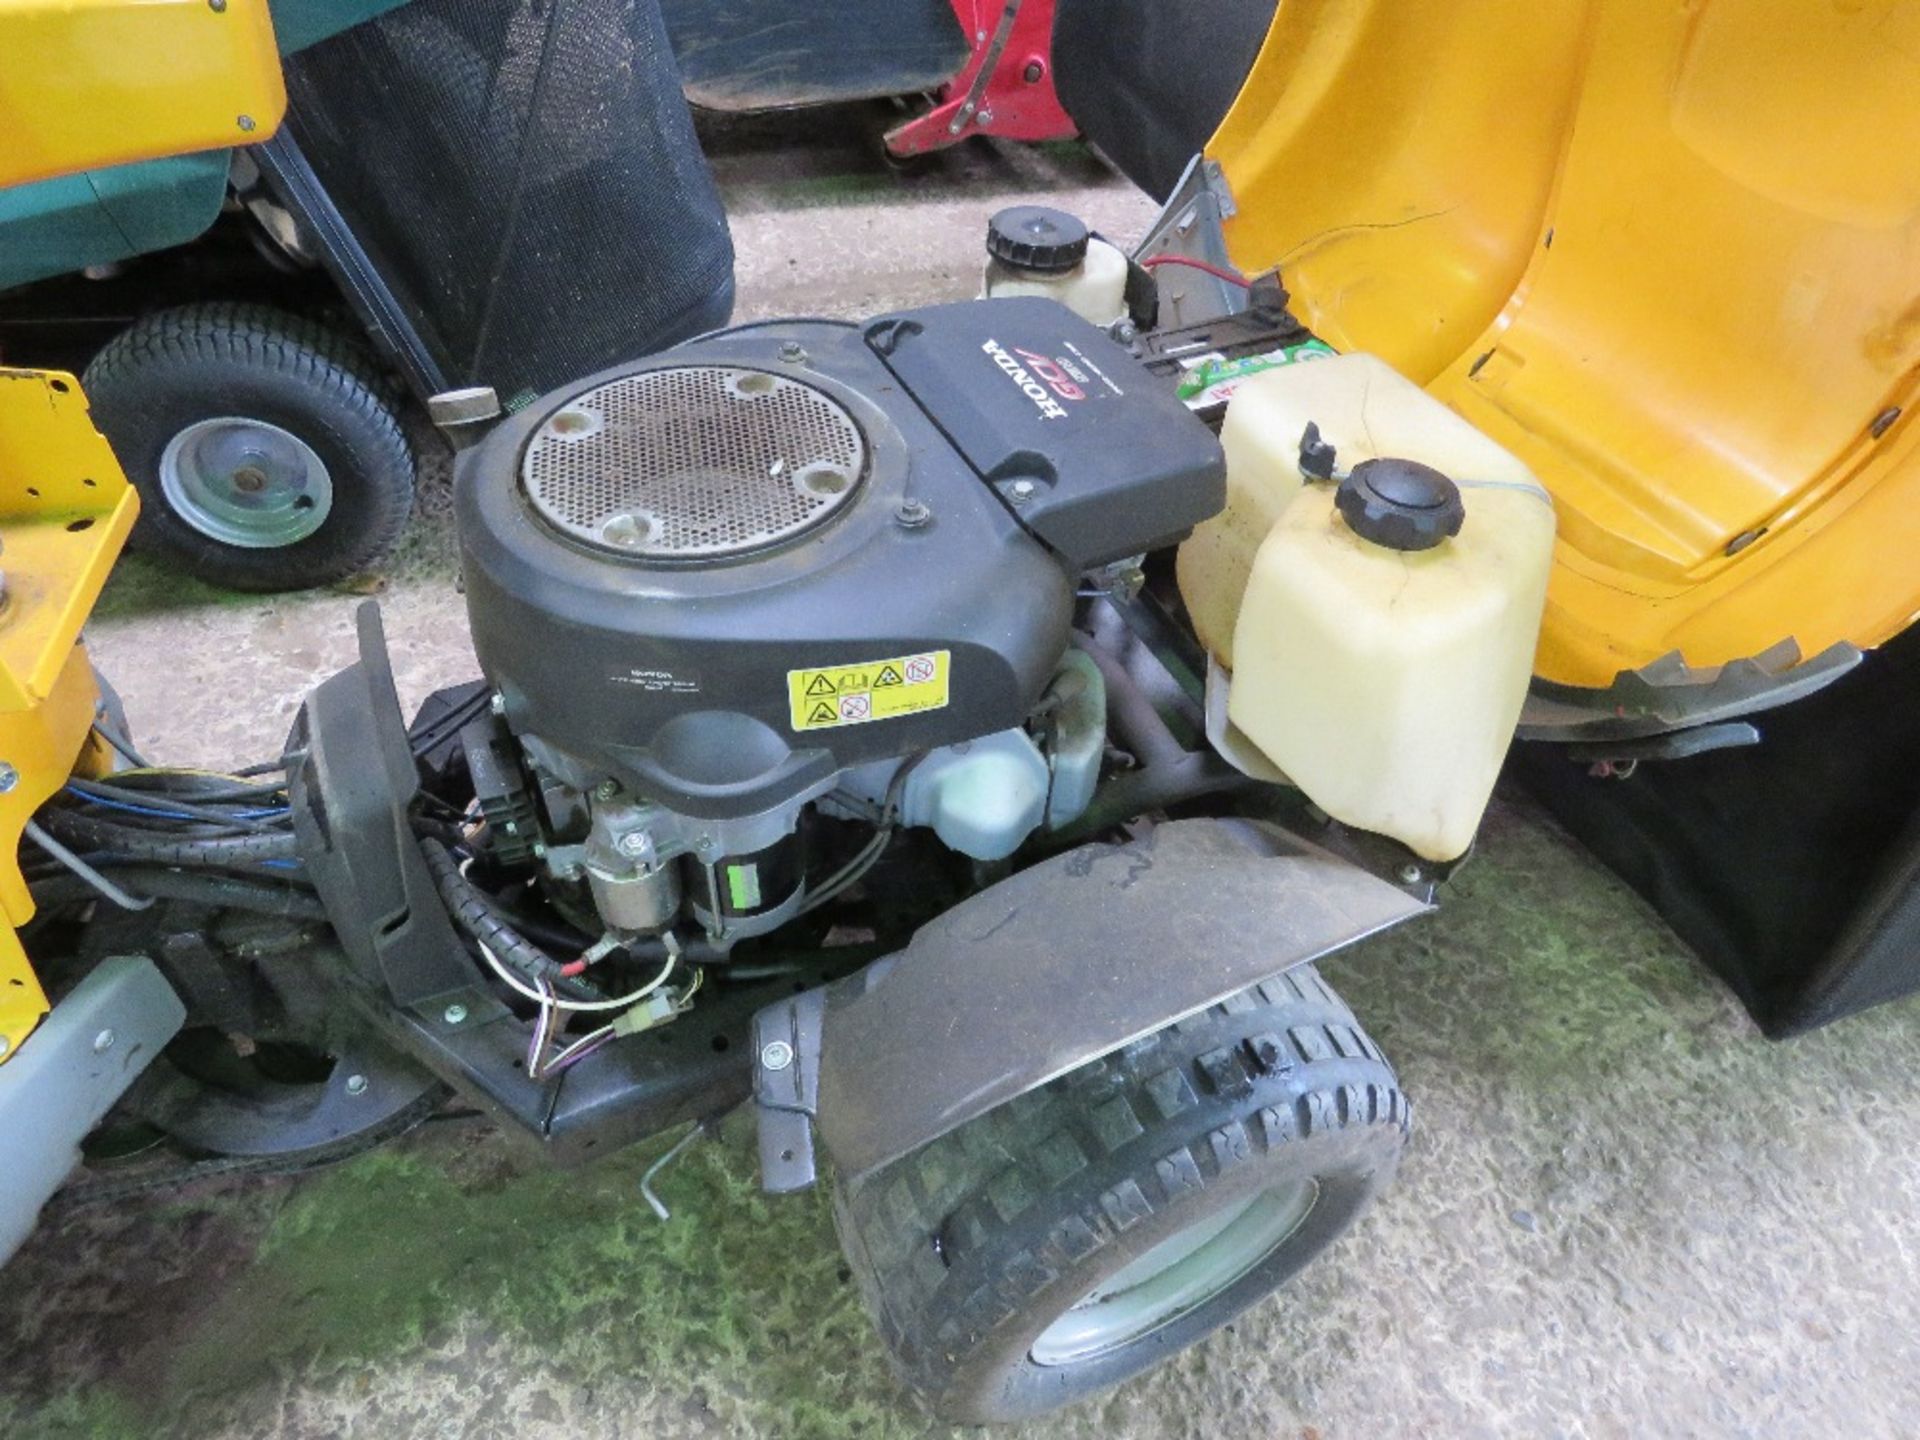 STIGA PARK ROYAL 4WD RIDE ON MOWER WITH OUTFRONT COMBIPRO 110 DECK FITTED. HONDA PETROL ENGINE. WHE - Image 9 of 12